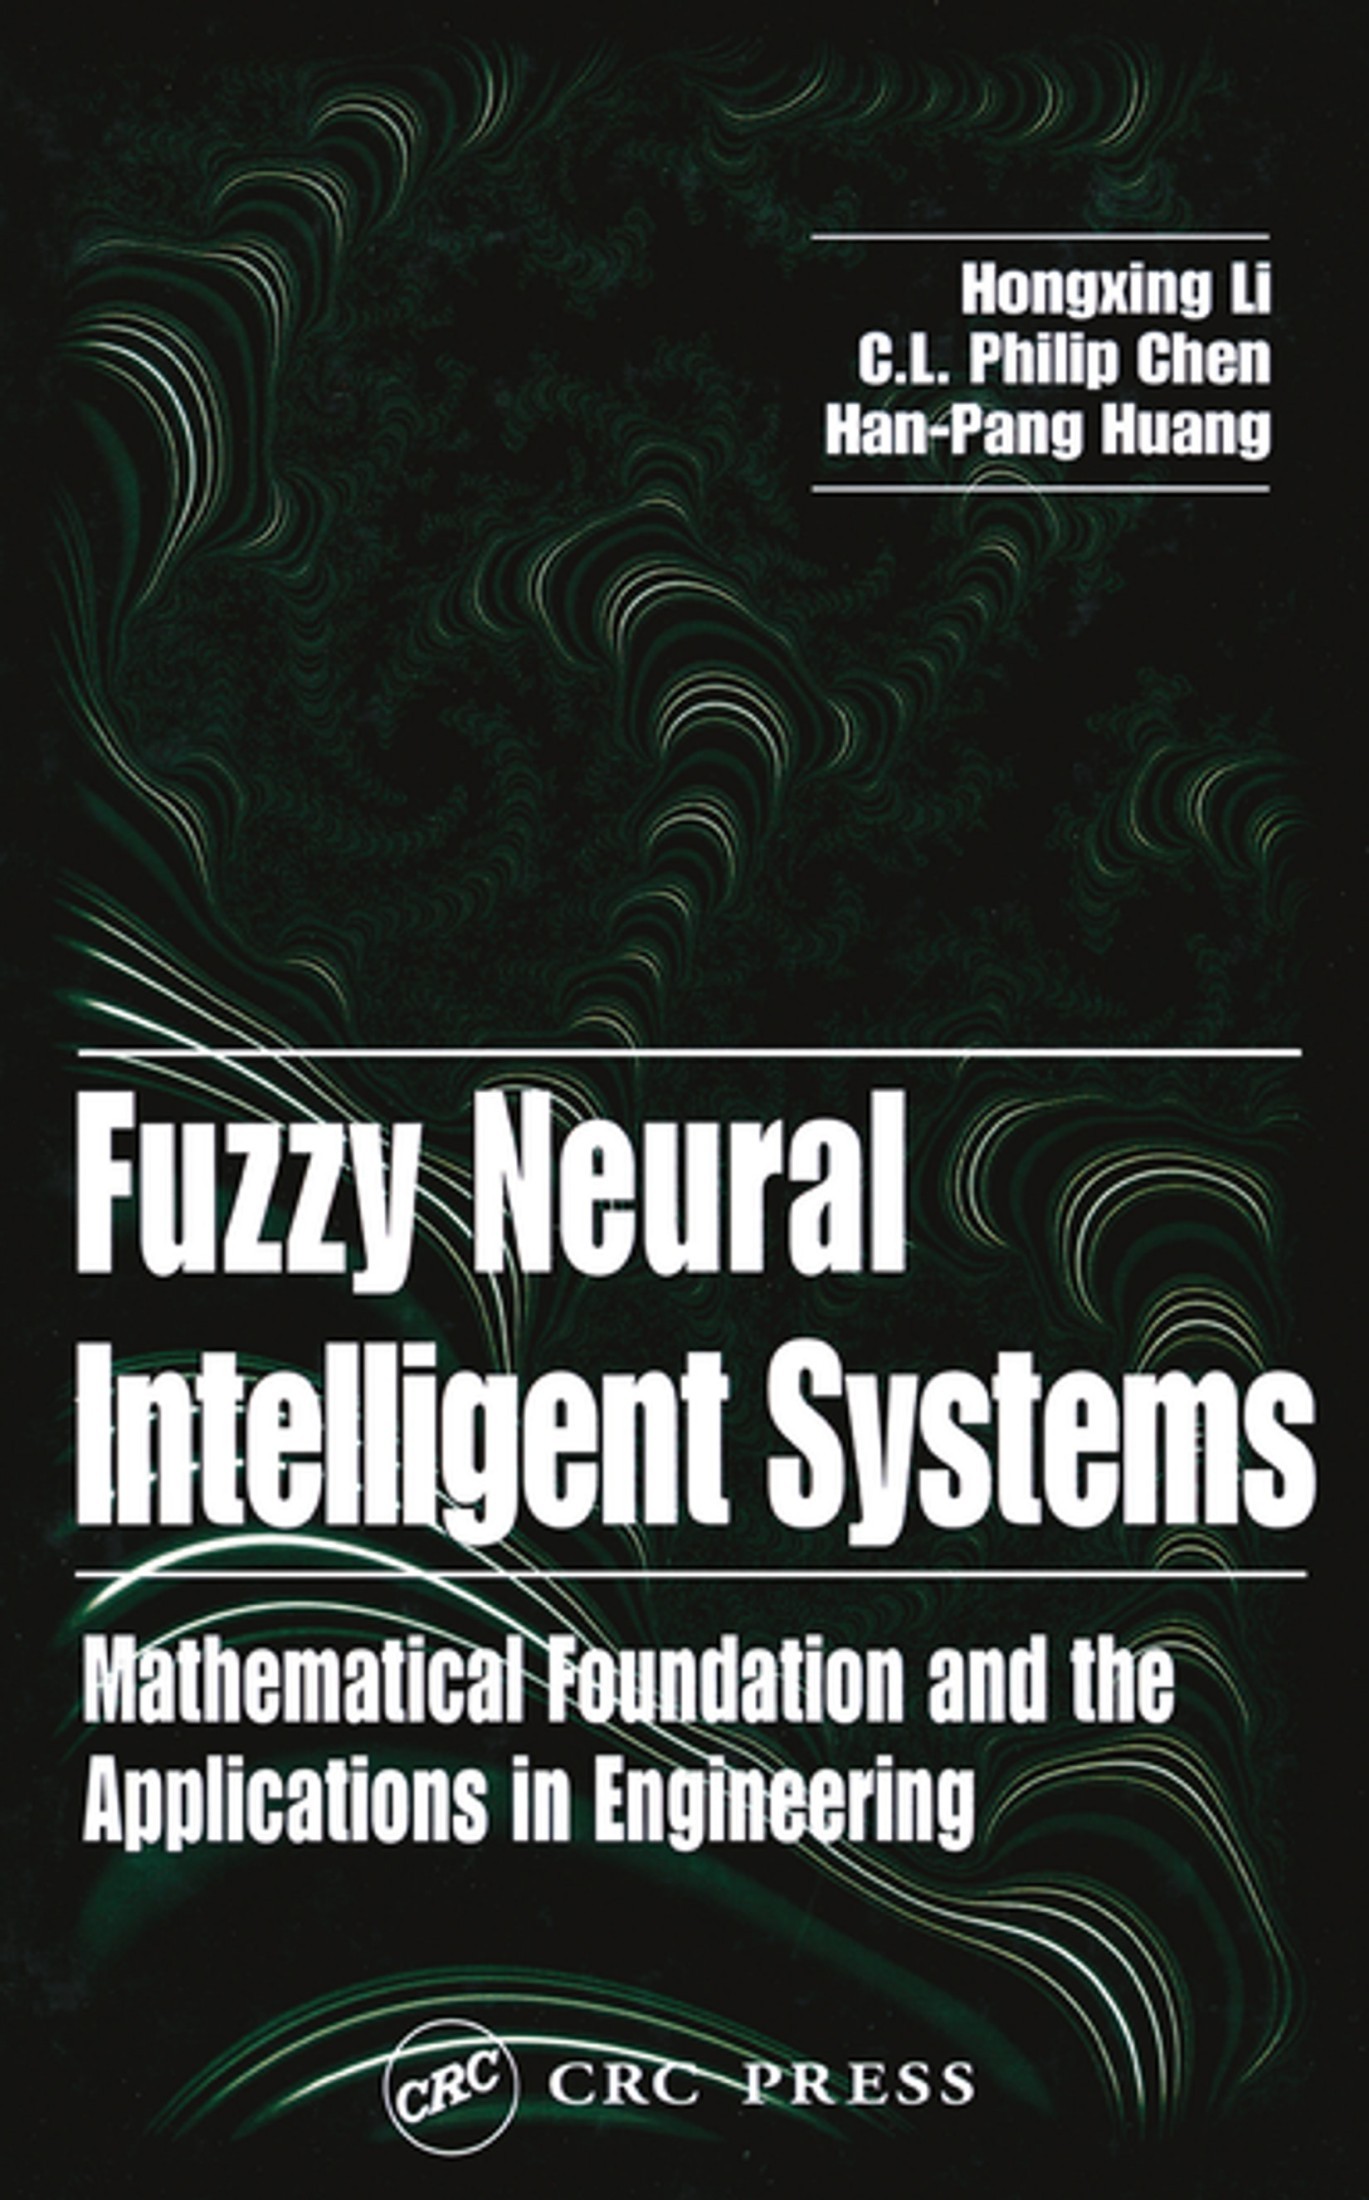 Fuzzy Neural Intelligent Systems: Mathematical Foundation and the Applications in Engineering